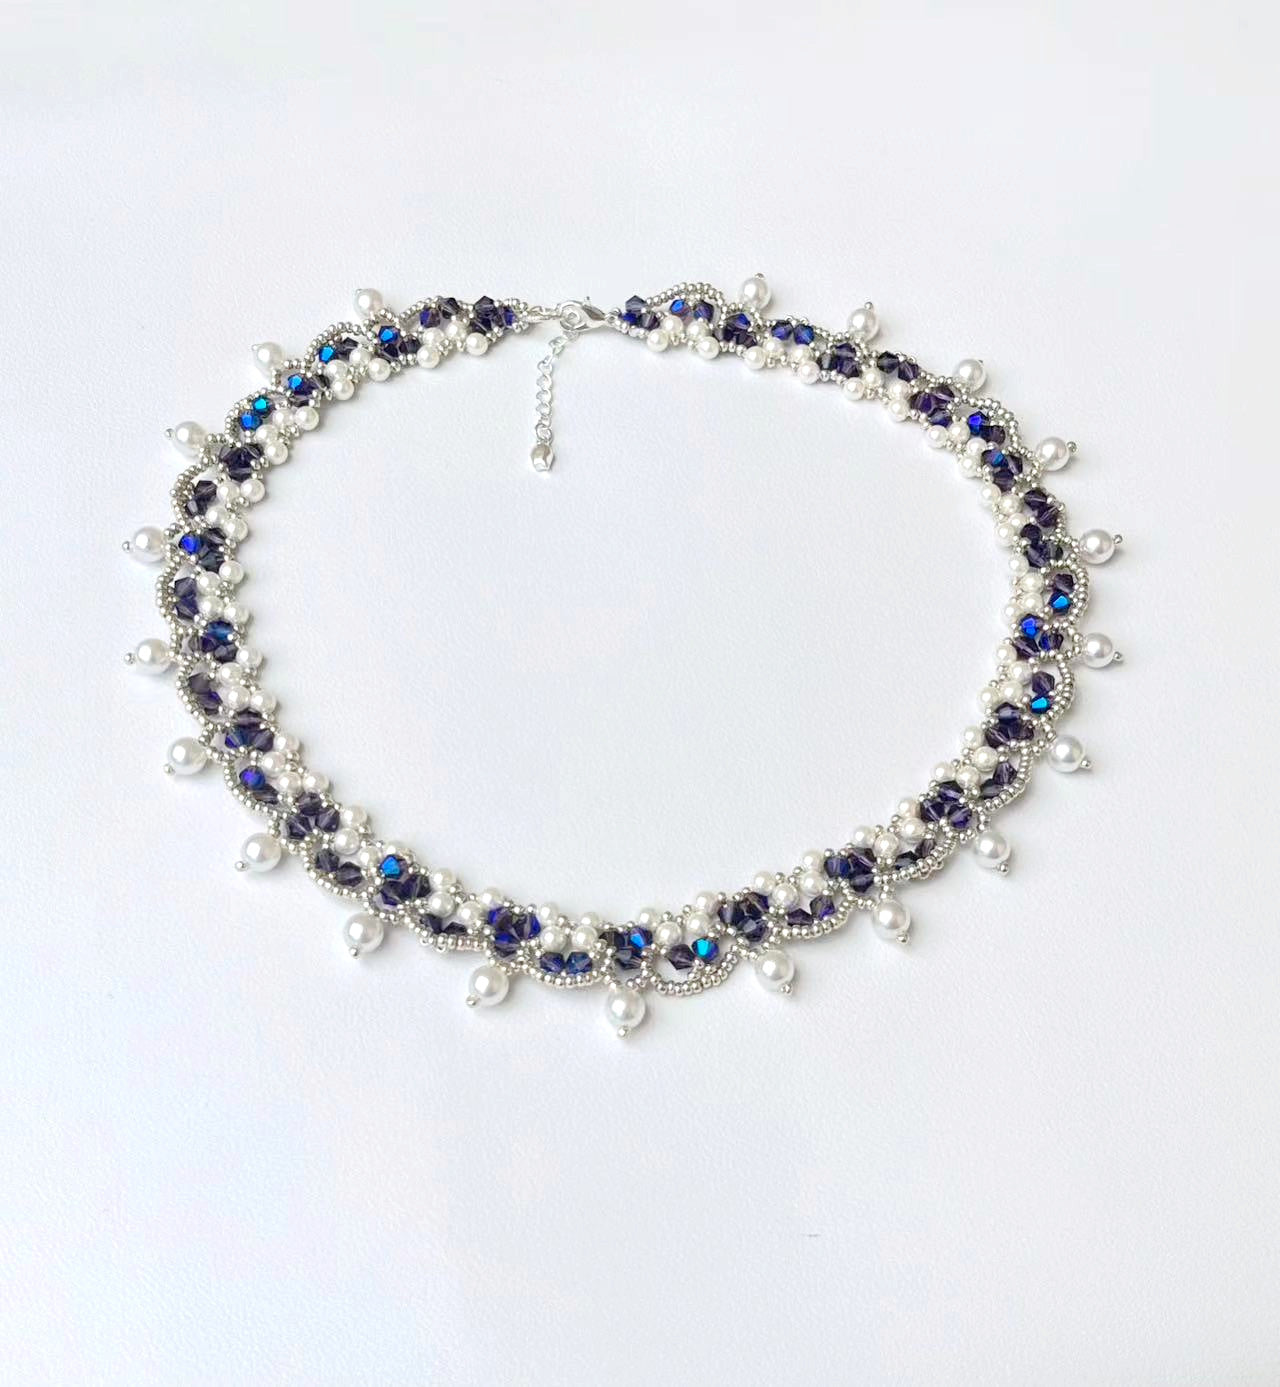 Vintage Handcrafted Crystal Bead Necklace